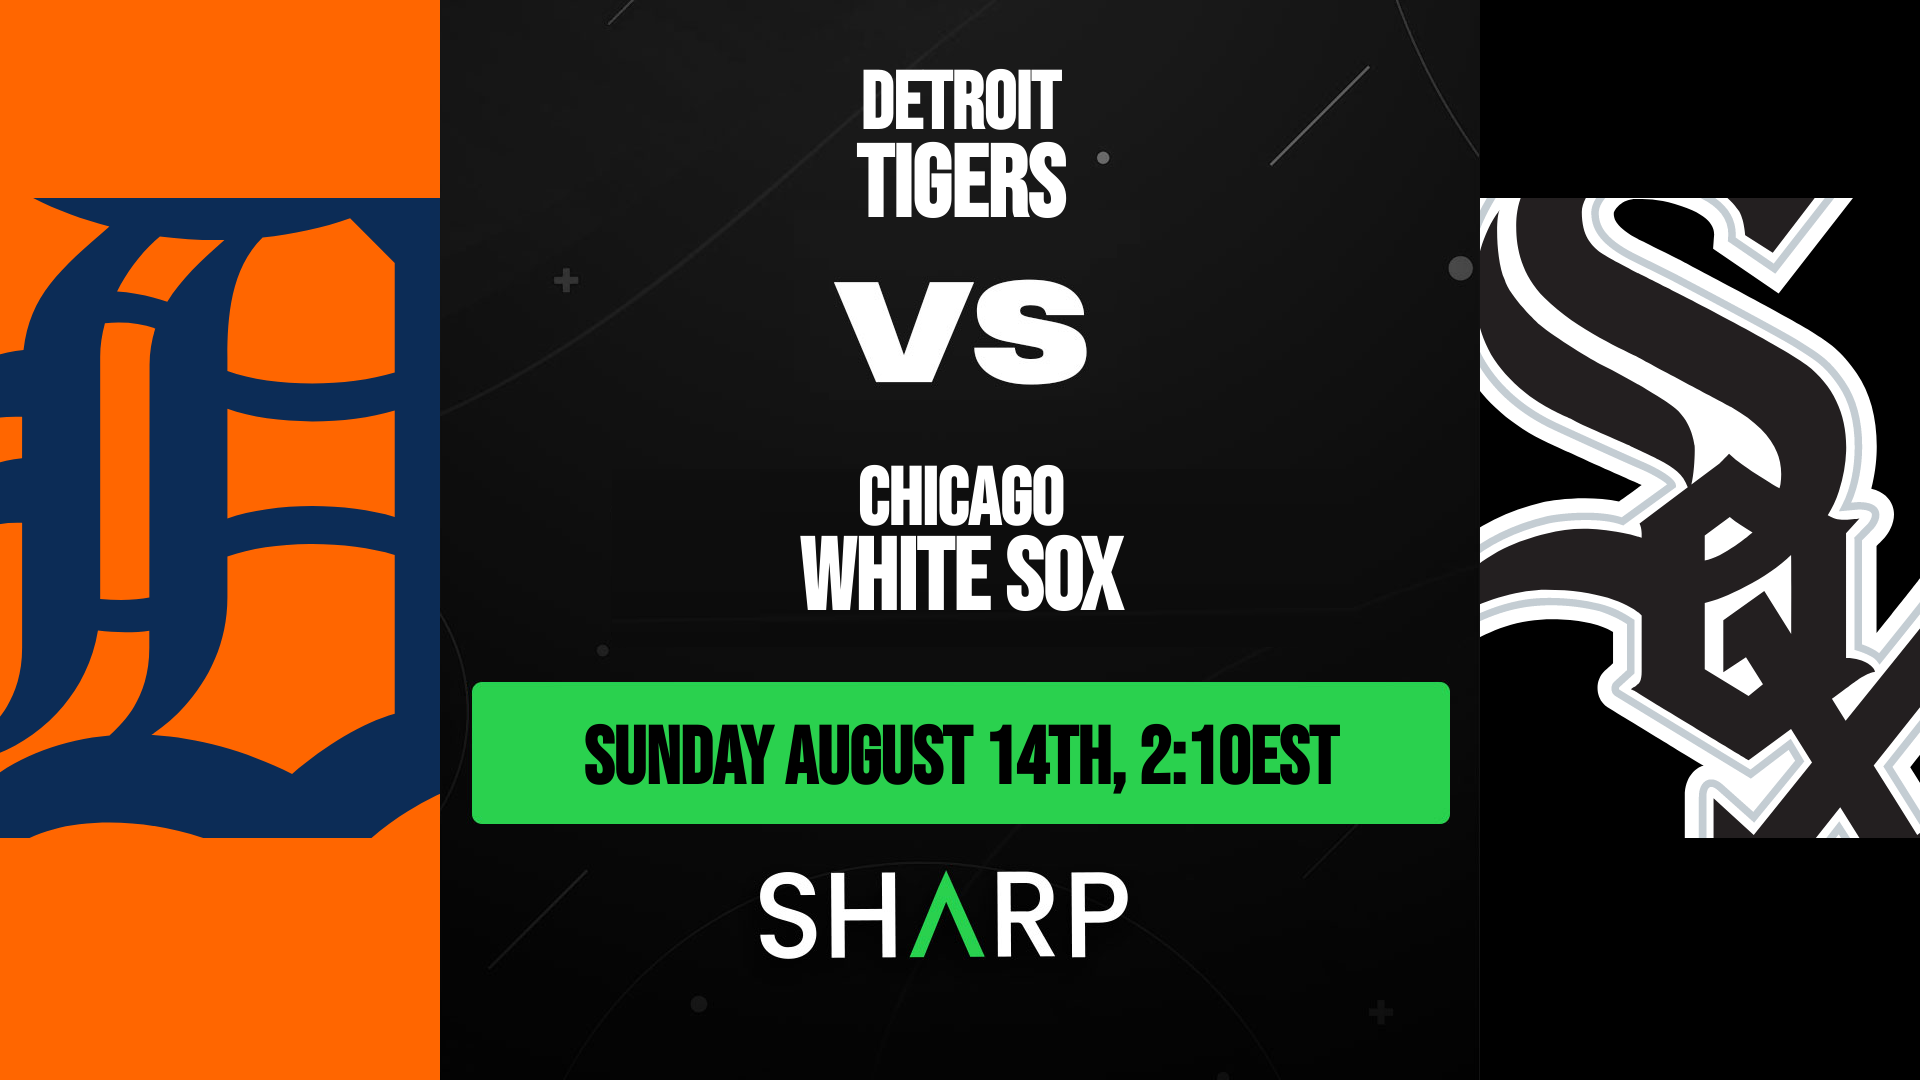 Detroit Tigers @ Chicago White Sox Matchup Preview - August 14th, 2022